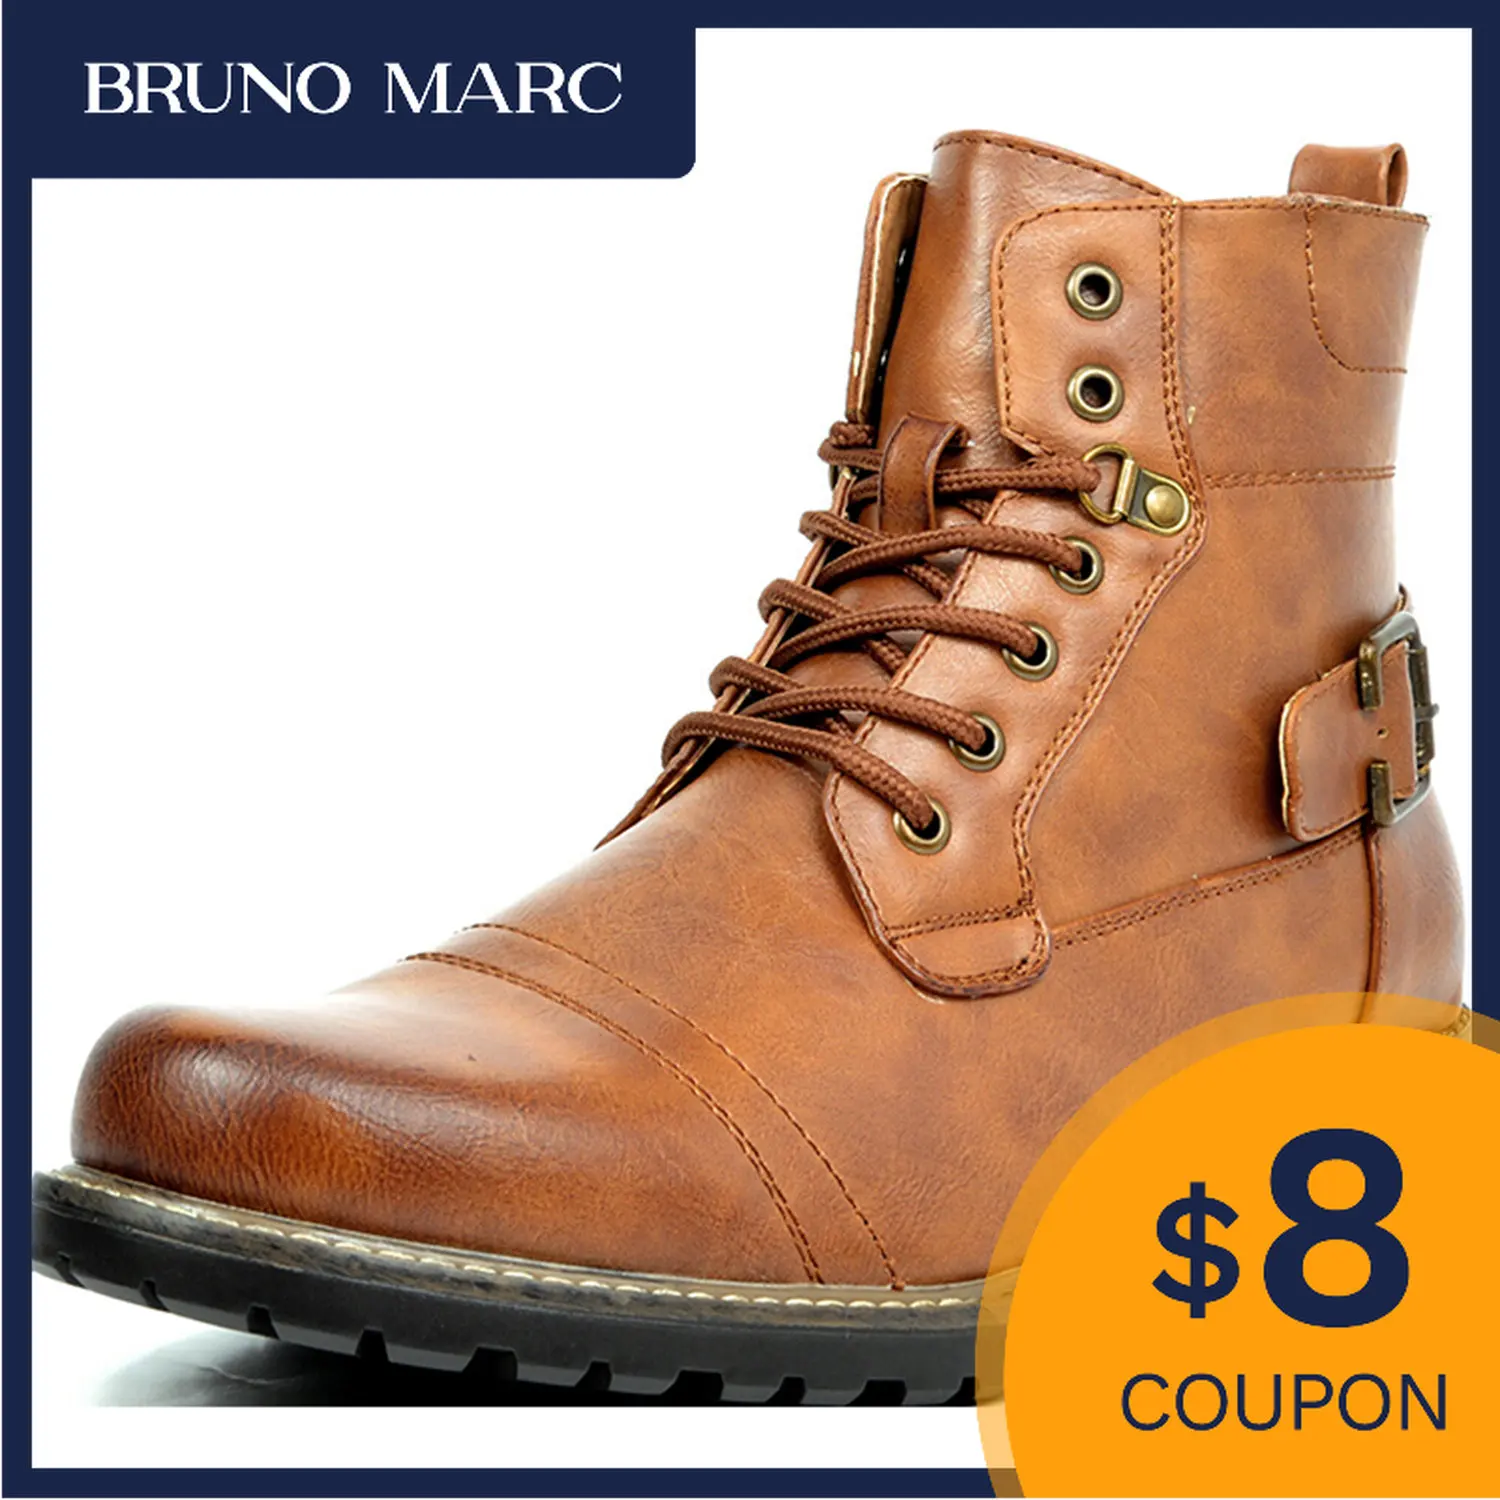 Bruno Marc Male Oxford Business Boot Motorcycle Round Toe Autumn Winter Men Ankle Boots Casual PU Leather Shoes Chelsea Cowboy